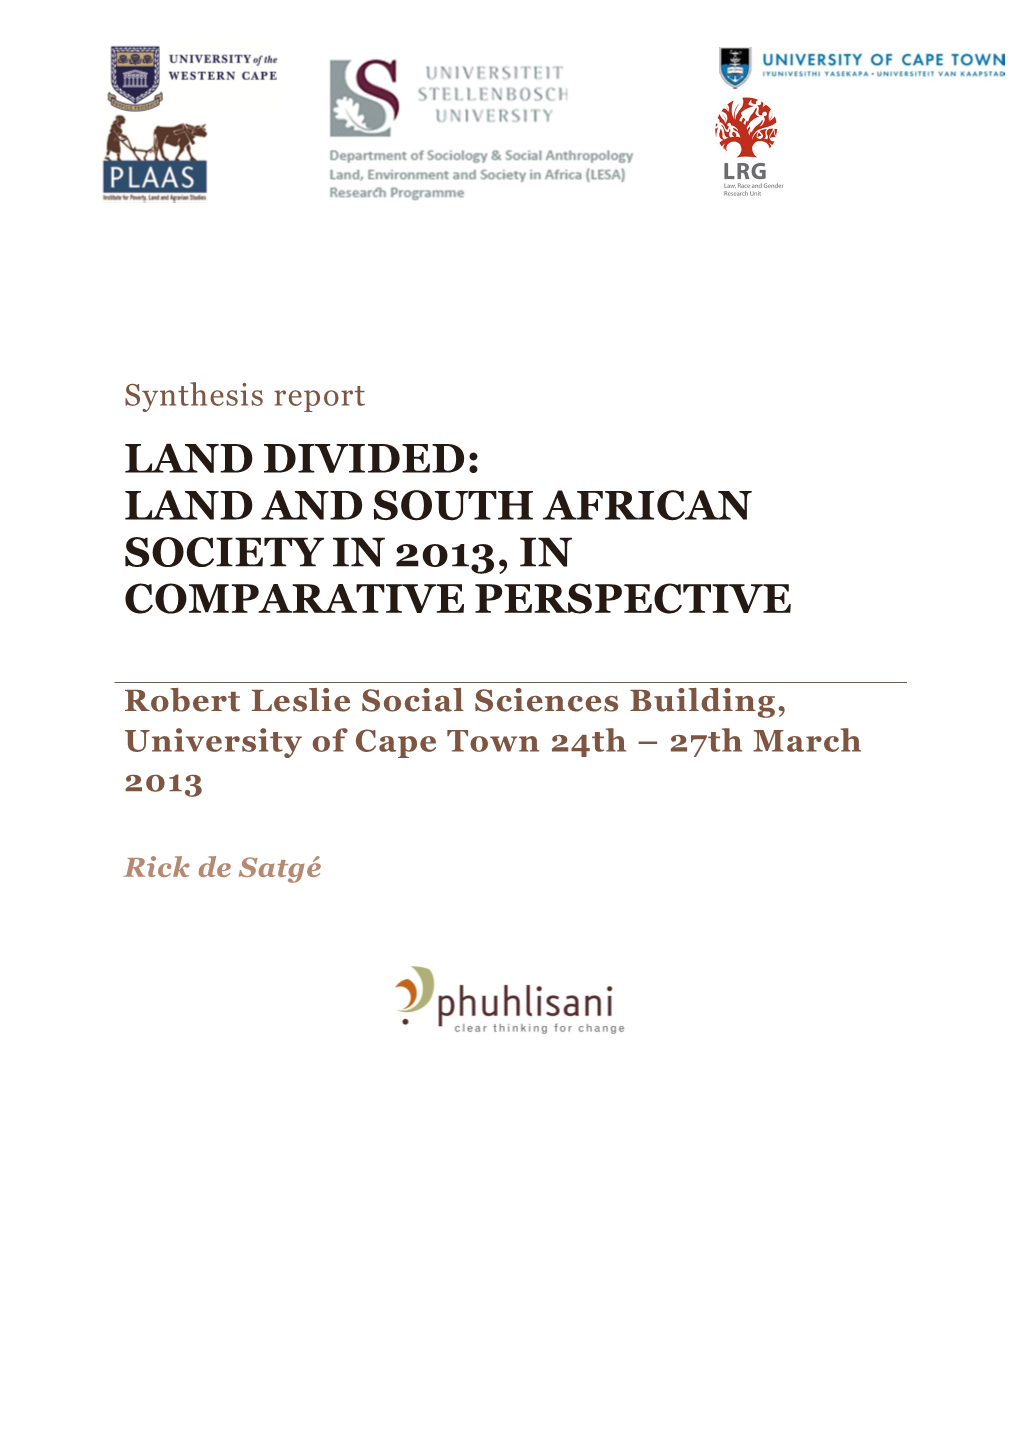 Land and South African Society in 2013, in Comparative Perspective